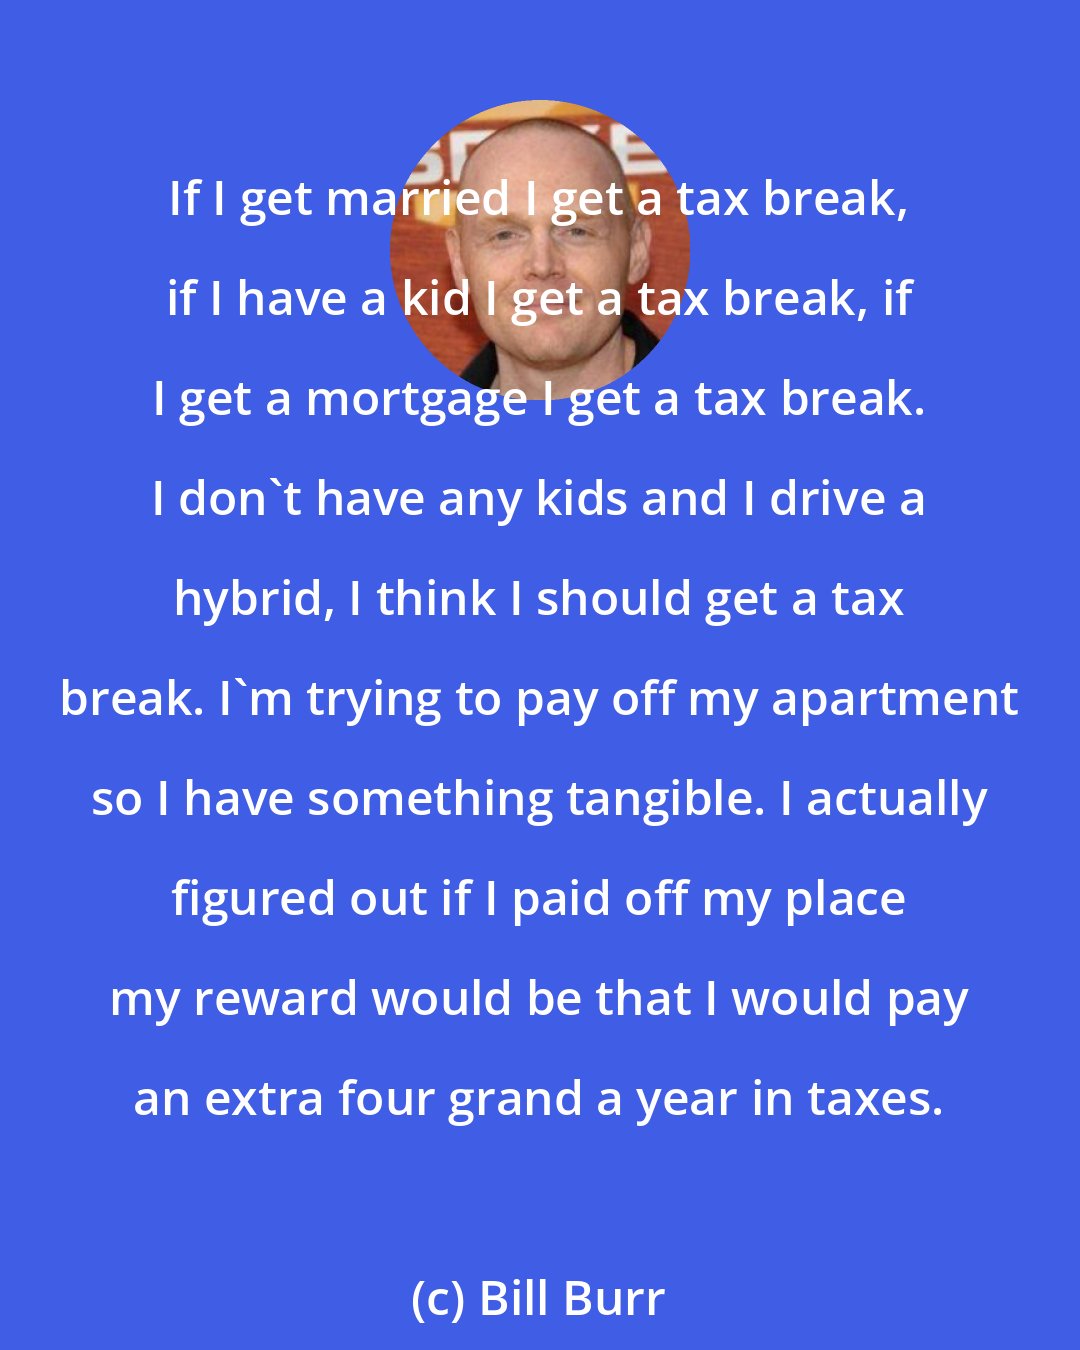 Bill Burr: If I get married I get a tax break, if I have a kid I get a tax break, if I get a mortgage I get a tax break. I don't have any kids and I drive a hybrid, I think I should get a tax break. I'm trying to pay off my apartment so I have something tangible. I actually figured out if I paid off my place my reward would be that I would pay an extra four grand a year in taxes.